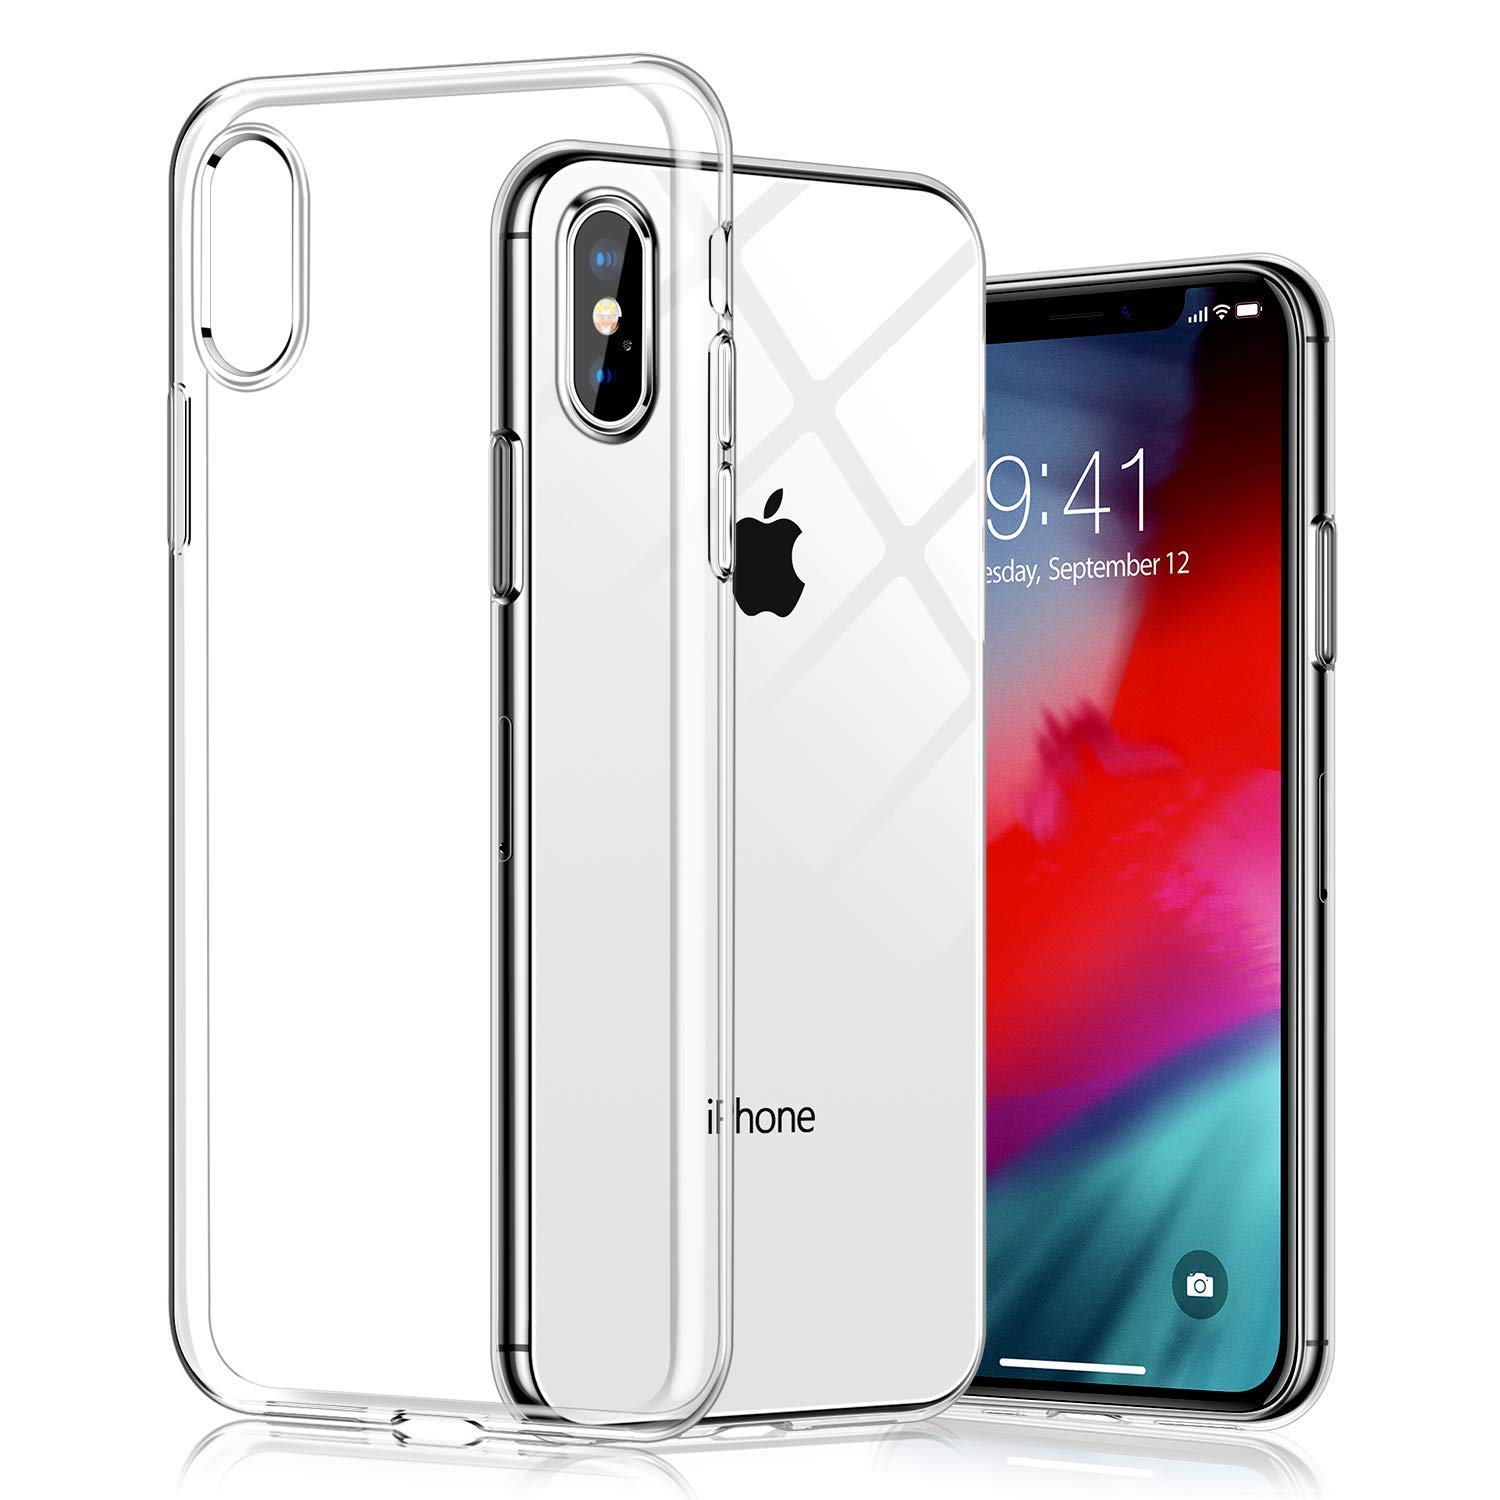 Newlike Protective Back Case Cover for iPhone XS Max.